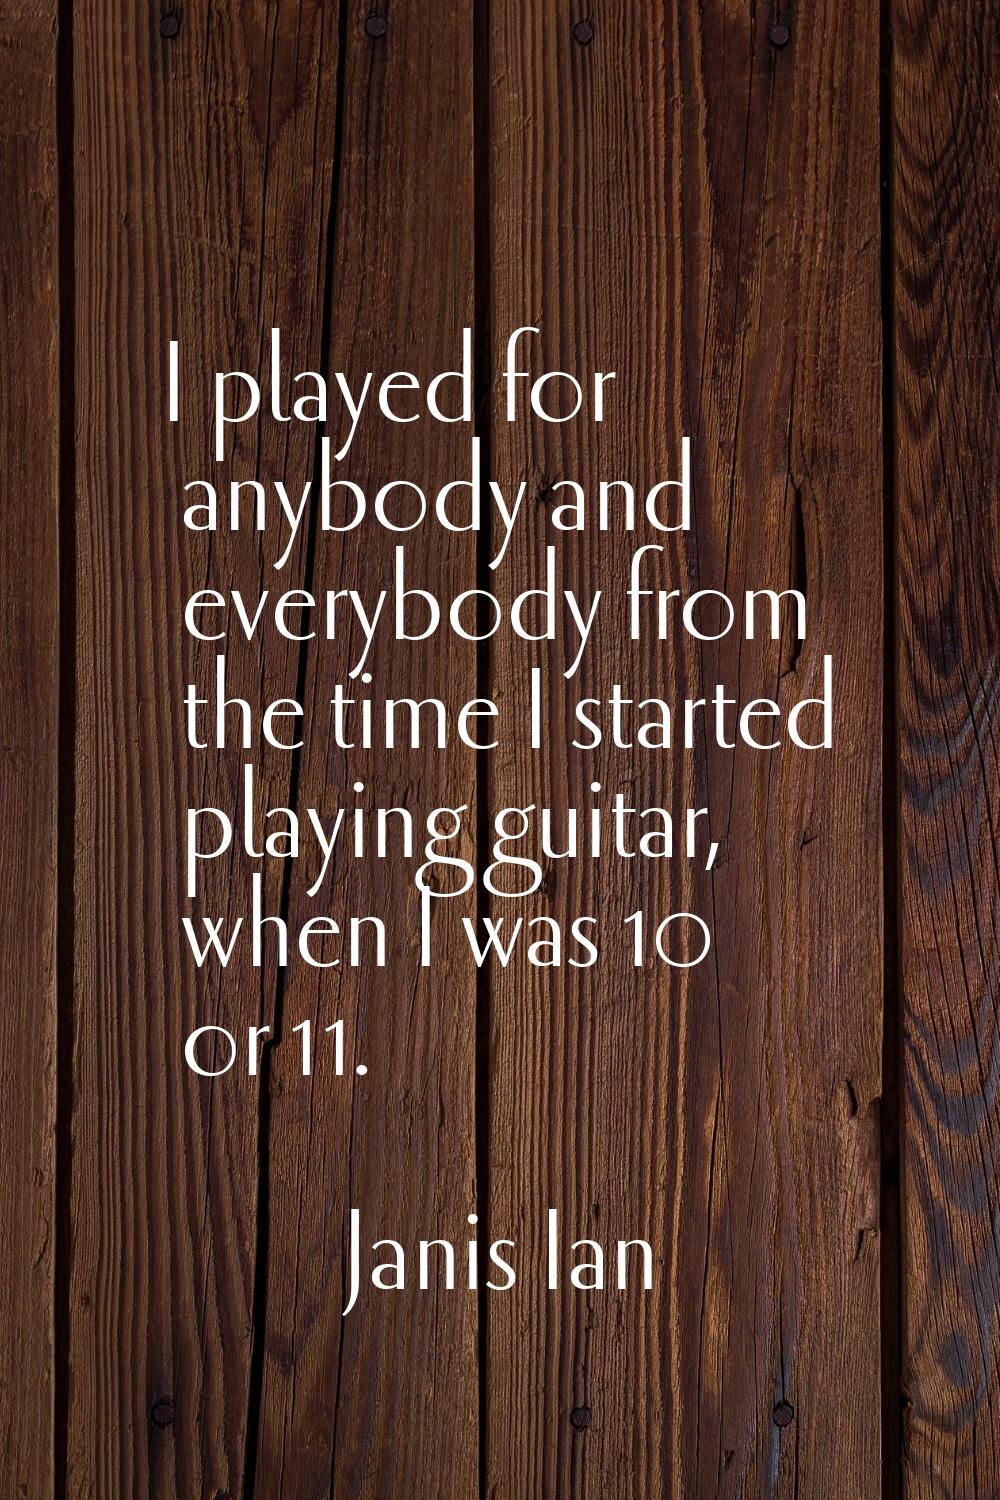 I played for anybody and everybody from the time I started playing guitar, when I was 10 or 11.